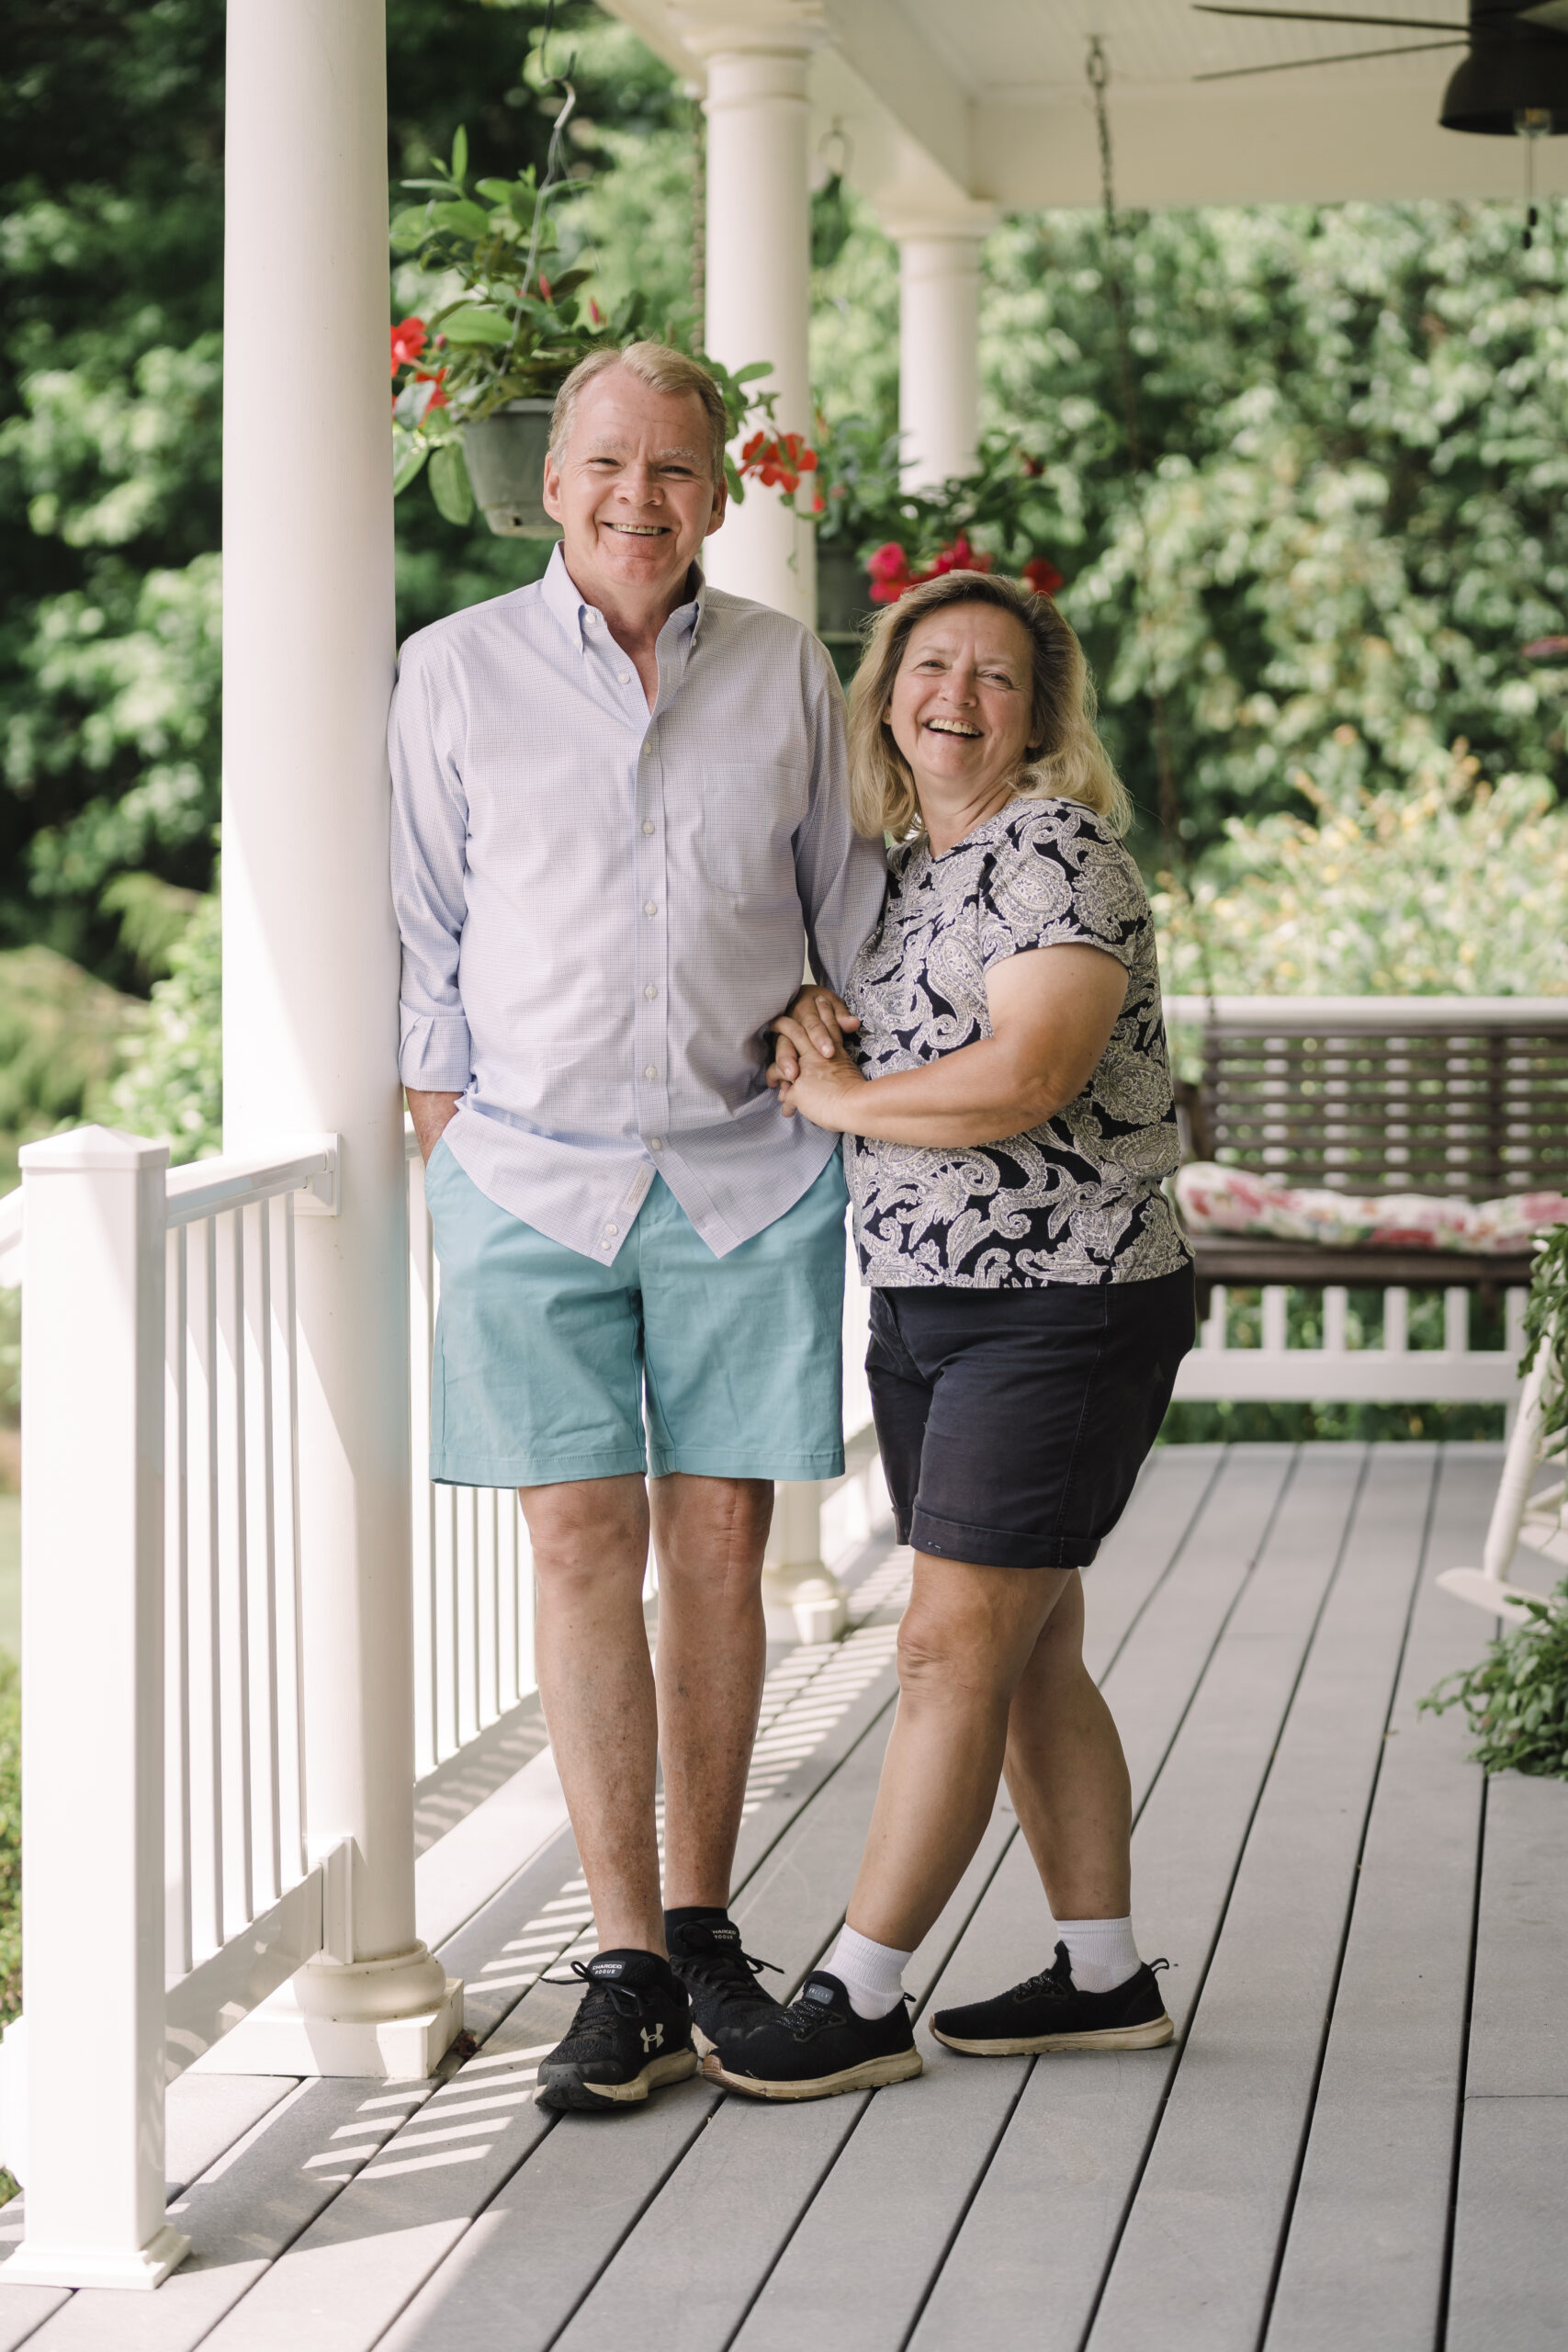 Ron & Jenny Barker, Owners of Seven Oaks Bed & Breakfast stand on their porch in High Point, NC.